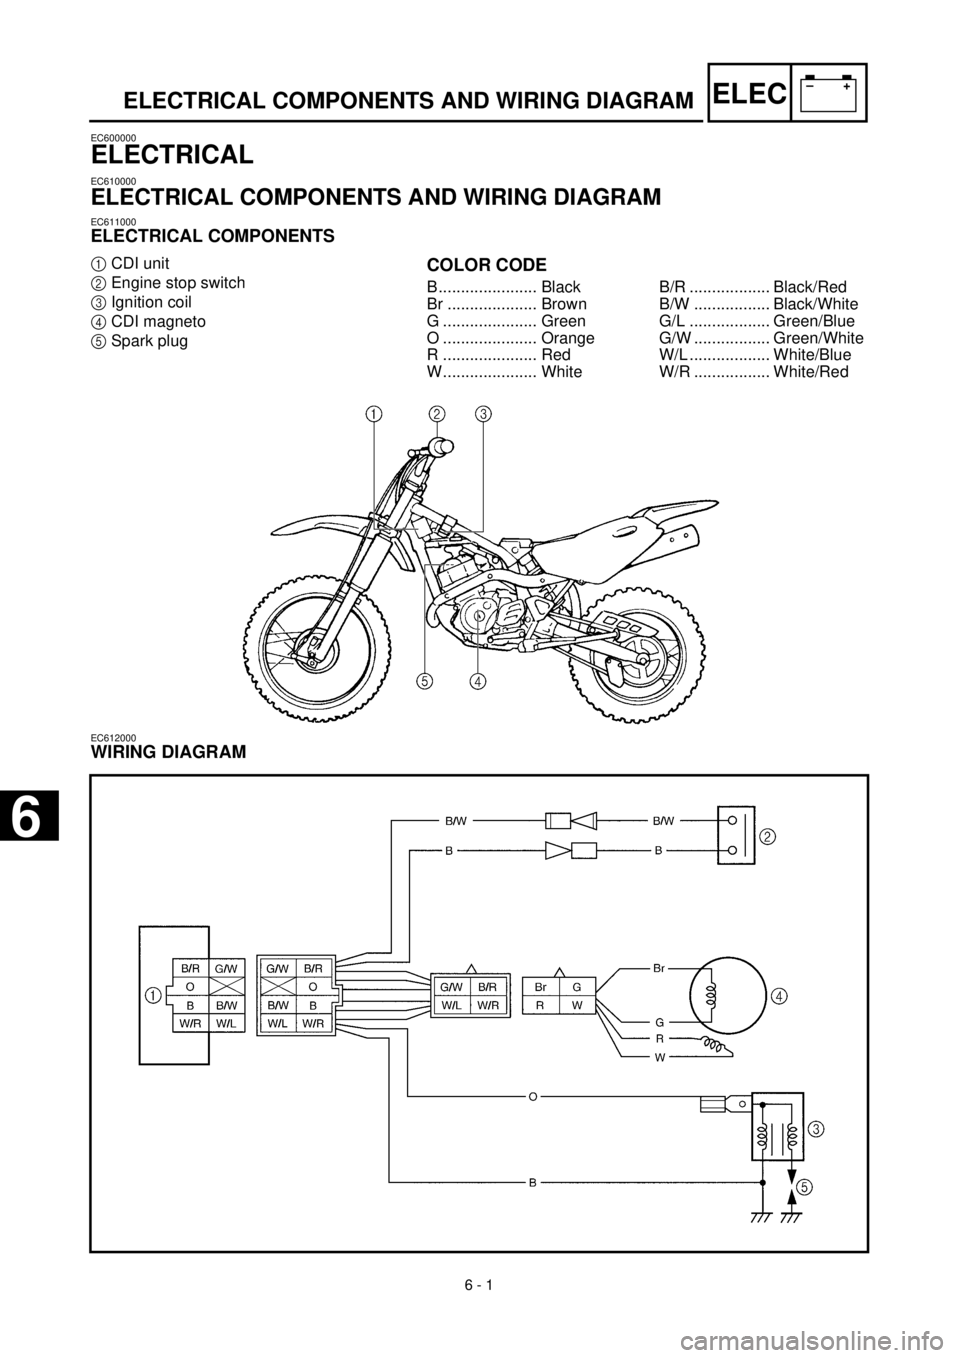 YAMAHA TTR125 2000  Notices Demploi (in French)  
6 - 1
–+ELEC
 
ELECTRICAL COMPONENTS AND WIRING DIAGRAM 
EC600000 
ELECTRICAL 
EC610000 
ELECTRICAL COMPONENTS AND WIRING DIAGRAM 
EC611000 
ELECTRICAL COMPONENTS 
1  
CDI unit  
2  
Engine stop s